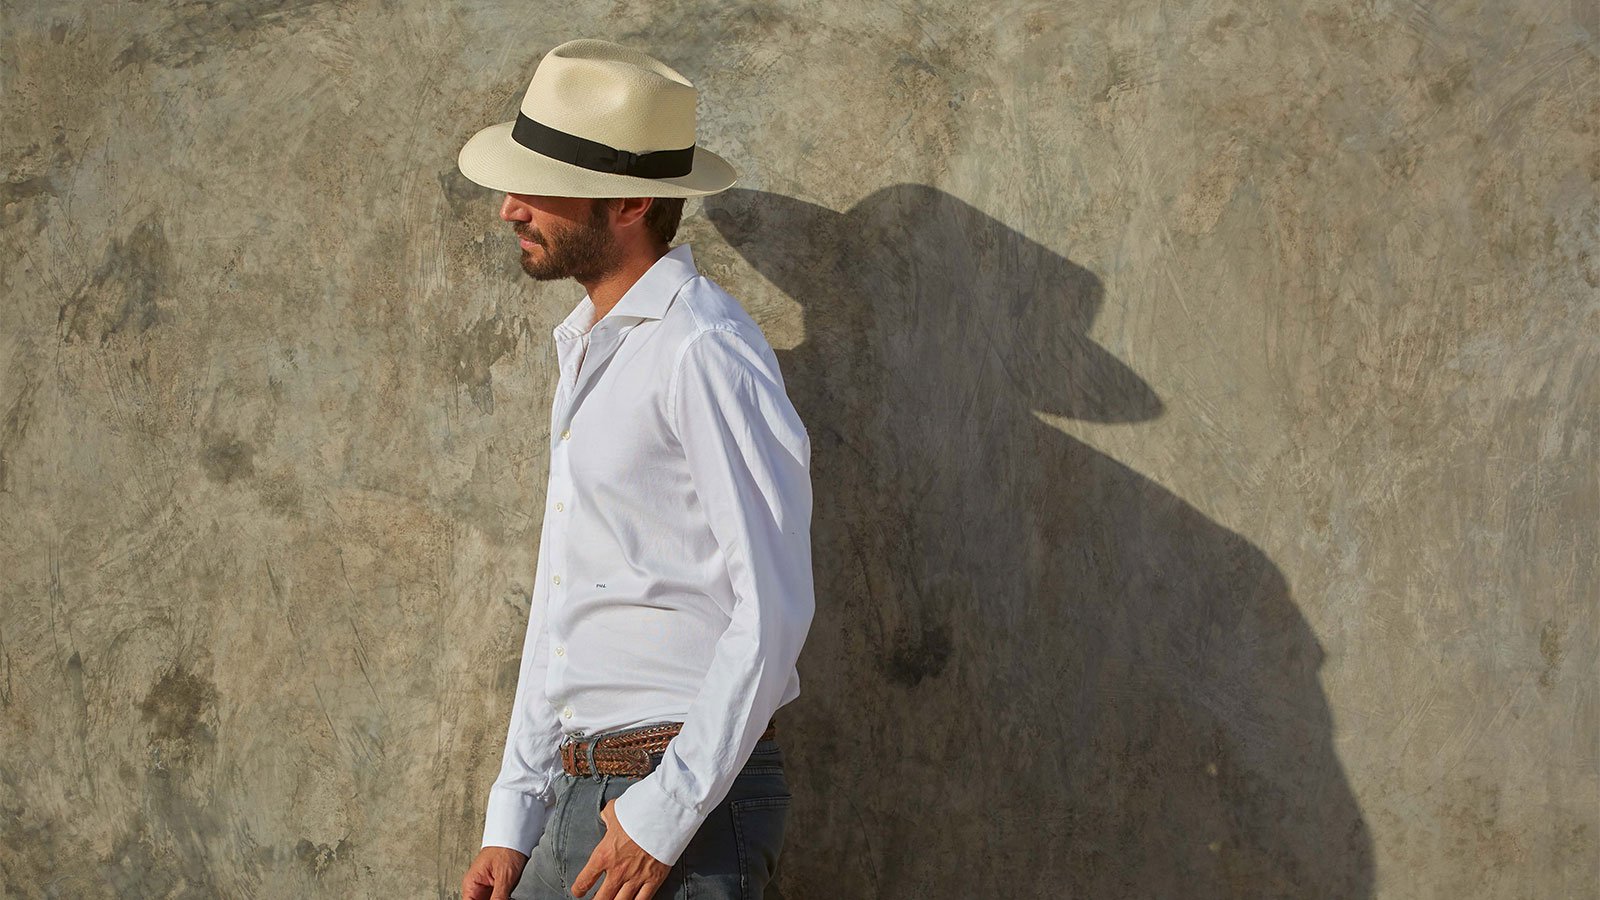 Design
Rarer than a perfect diamond and infinitely more refined, we are proud to carry the most exquisitely crafted Montecristi Panama hats in the world. Depending on the quality of the weave, a Worth & Worth Montecristi Panama Hat can take several months to weave by our master weavers in Ecuador. Available in four different qualities, the result is a hat with soft texture, translucent appearance and luminous ivory color.
Material
Montecristi Panama straw handwoven in Ecuador available in 4 different qualities: Artisan, Master, Museum and Superfino.
Specifications
With its semi-teardrop Style our Montecristi Havana combines a 3 3/4” to 4 crown. The brim can varies from 2 1/8” to 2 3/4” with an average of 2 3/8” with a weather Refined Brown Band. Handwoven by our master weavers in Ecuador Handcrafted in our atelier in NYC. Truly a work of art.